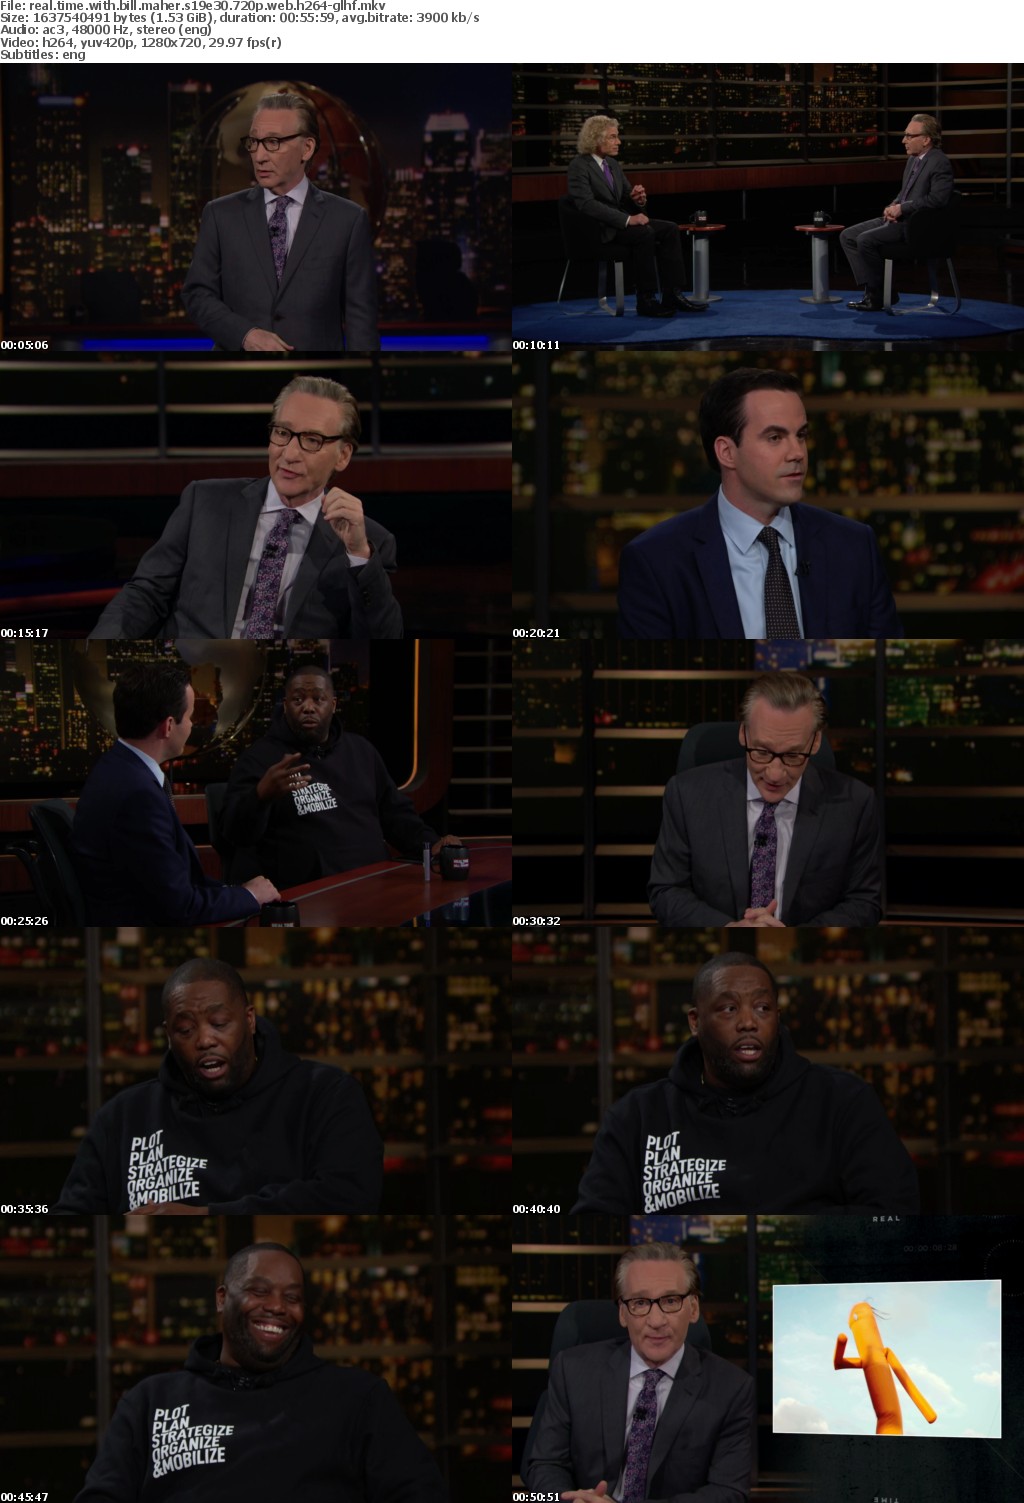 Real Time with Bill Maher S19E30 720p WEB H264-GLHF